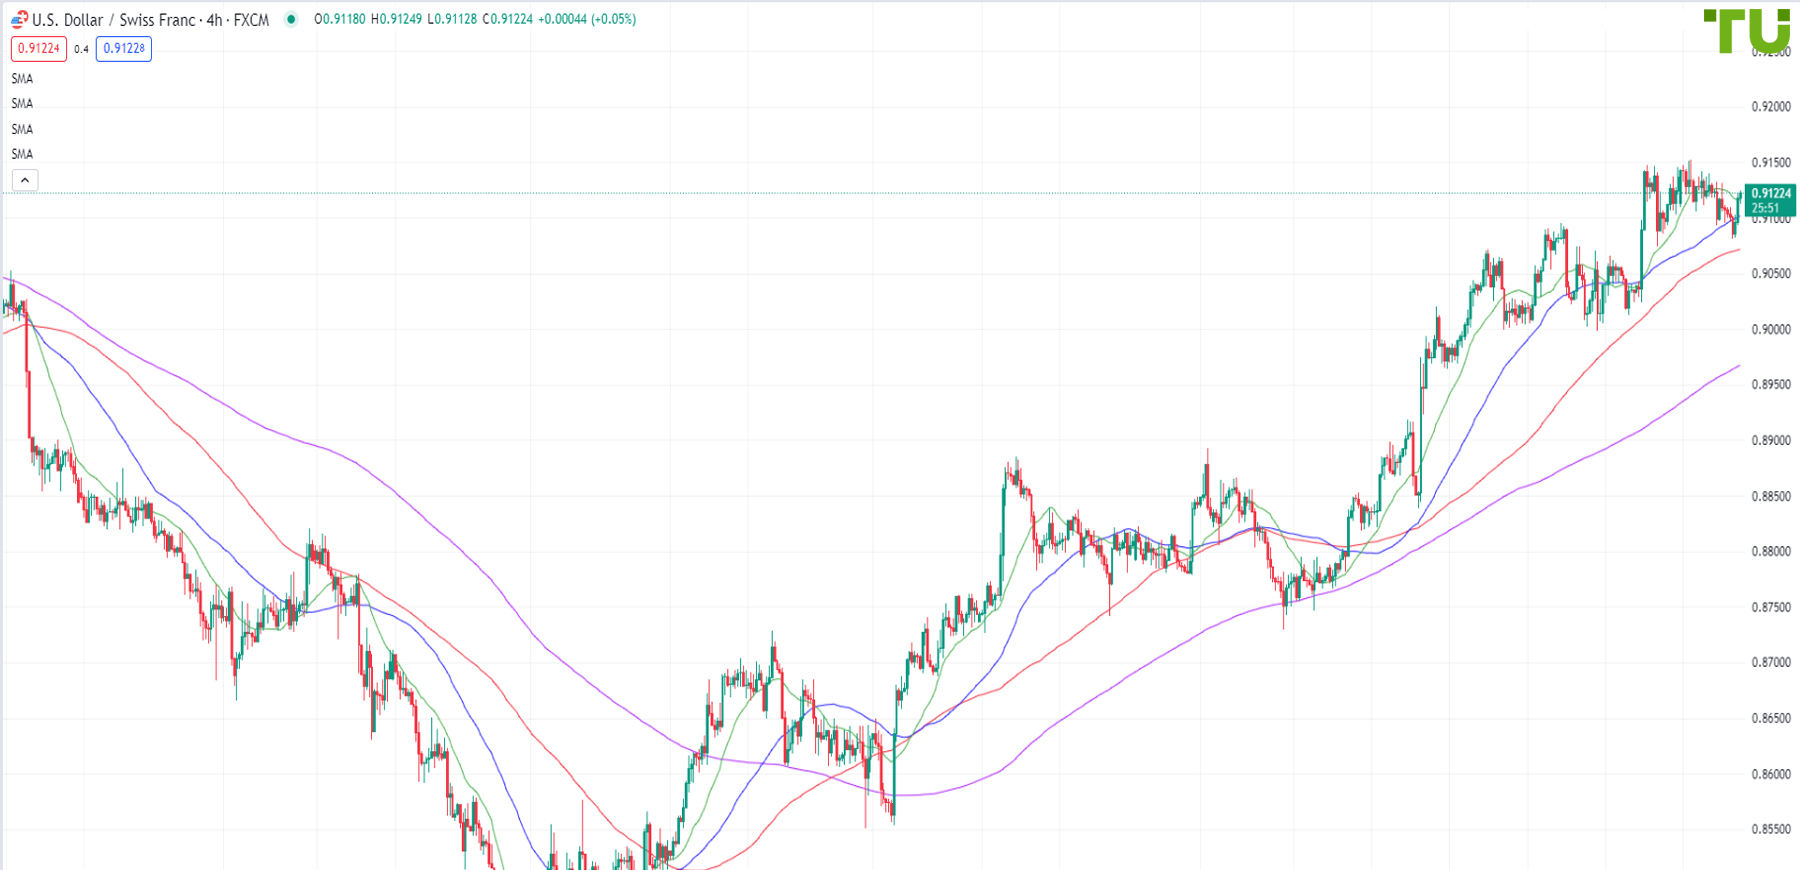 USD/CHF bought on decline